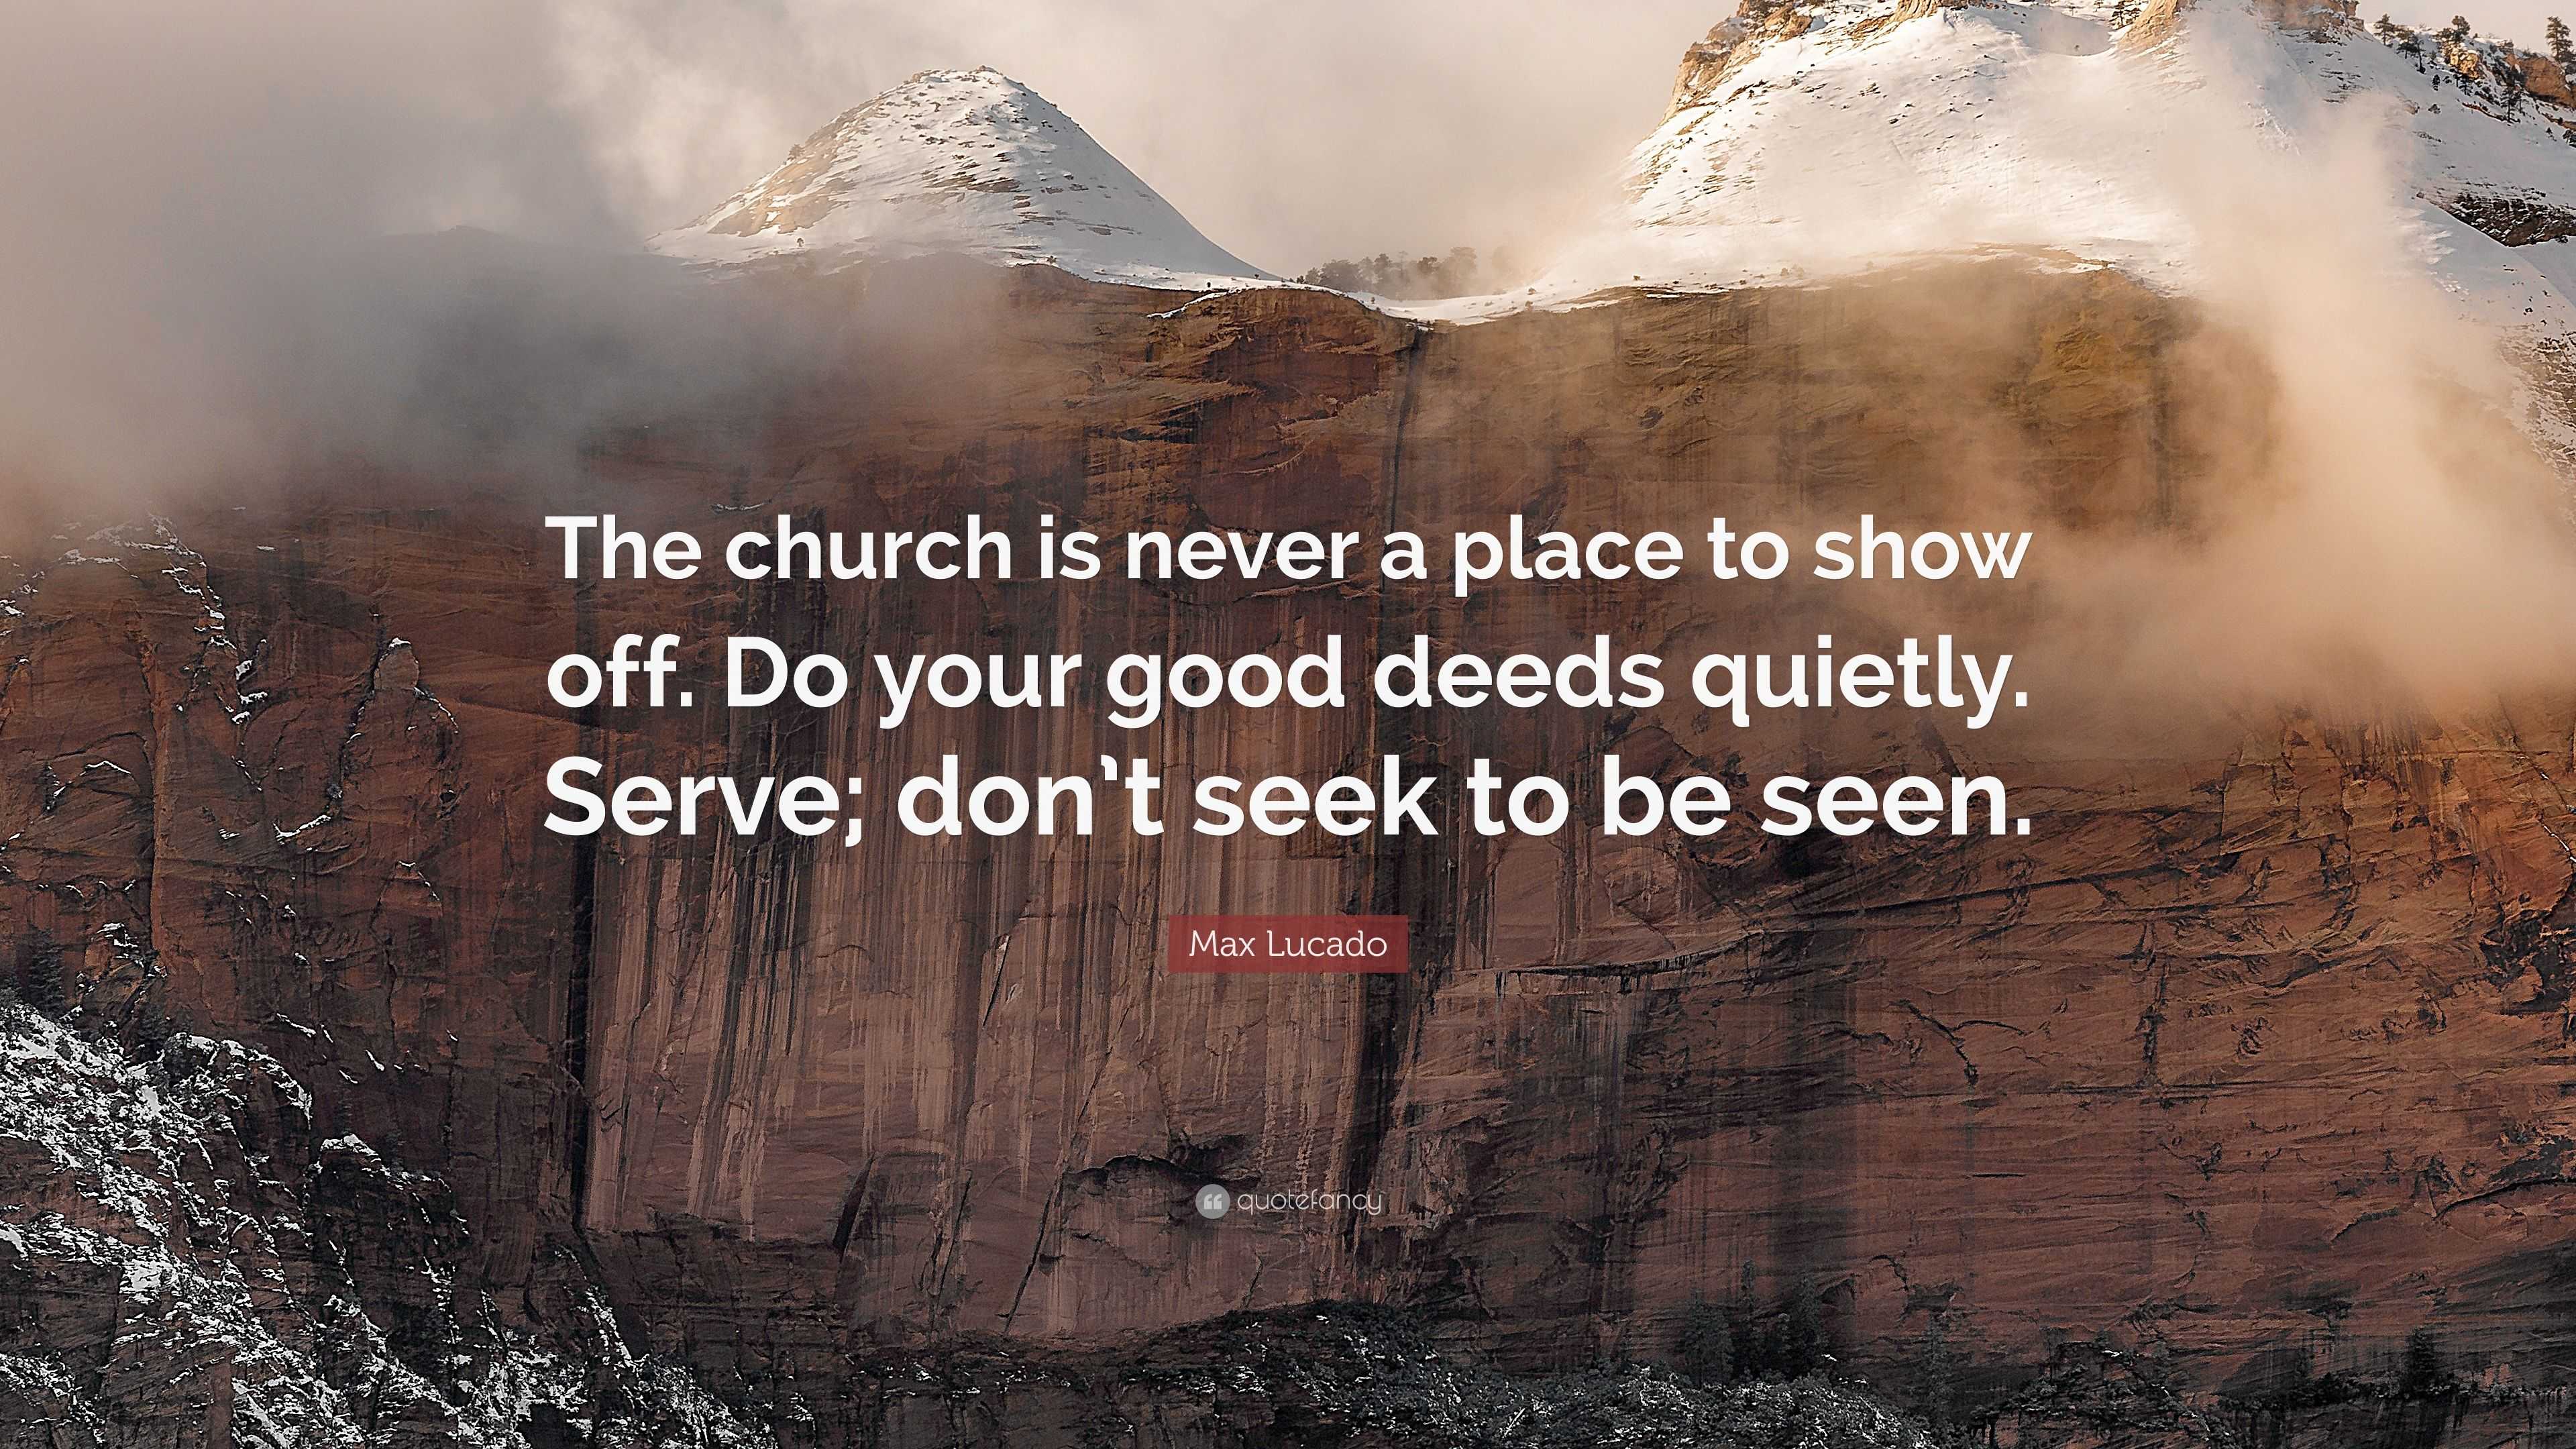 Max Lucado Quote “The church is never a place to show off Do